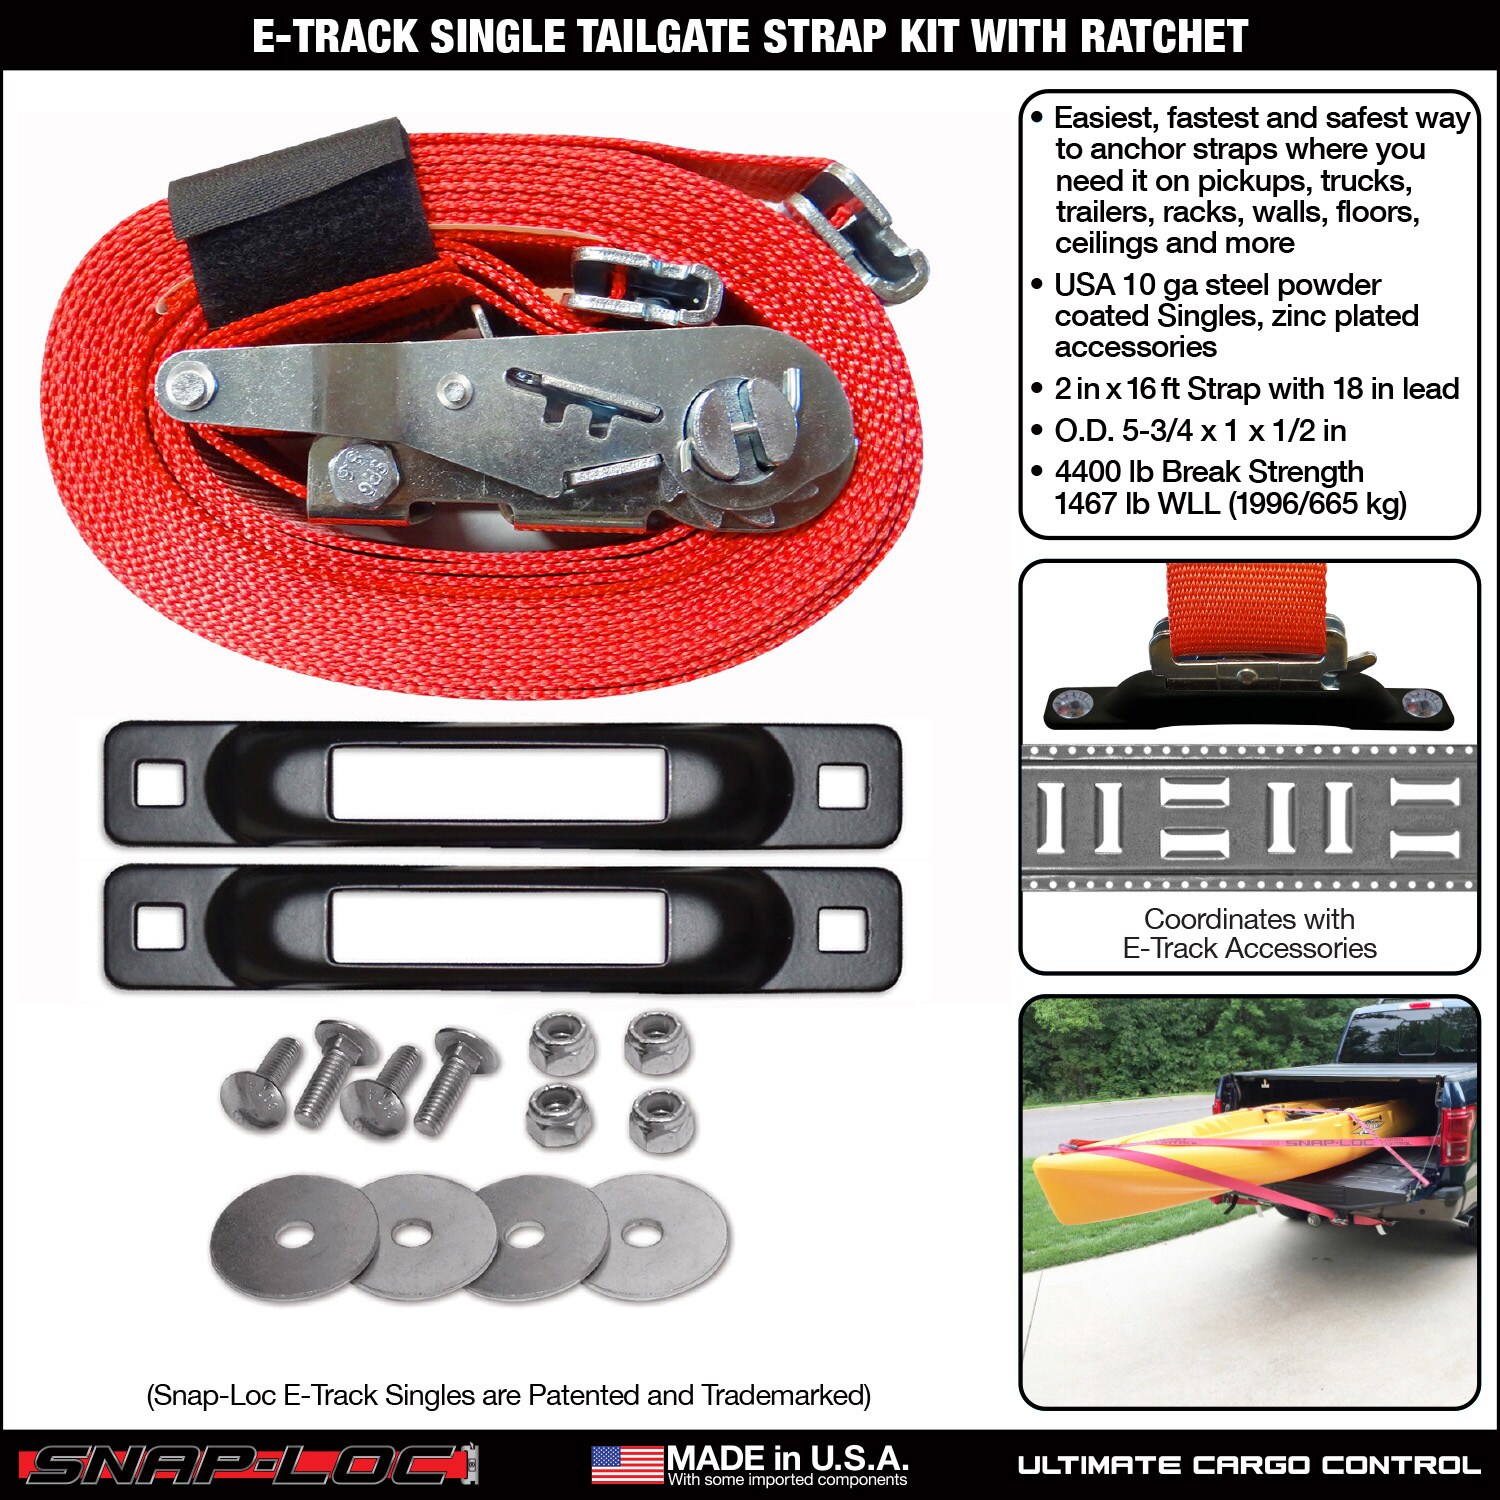 Snap-Loc E-Strap System Bonus Pack Plus with 2 x 16 in. Ratchet for Trucks & Trailers